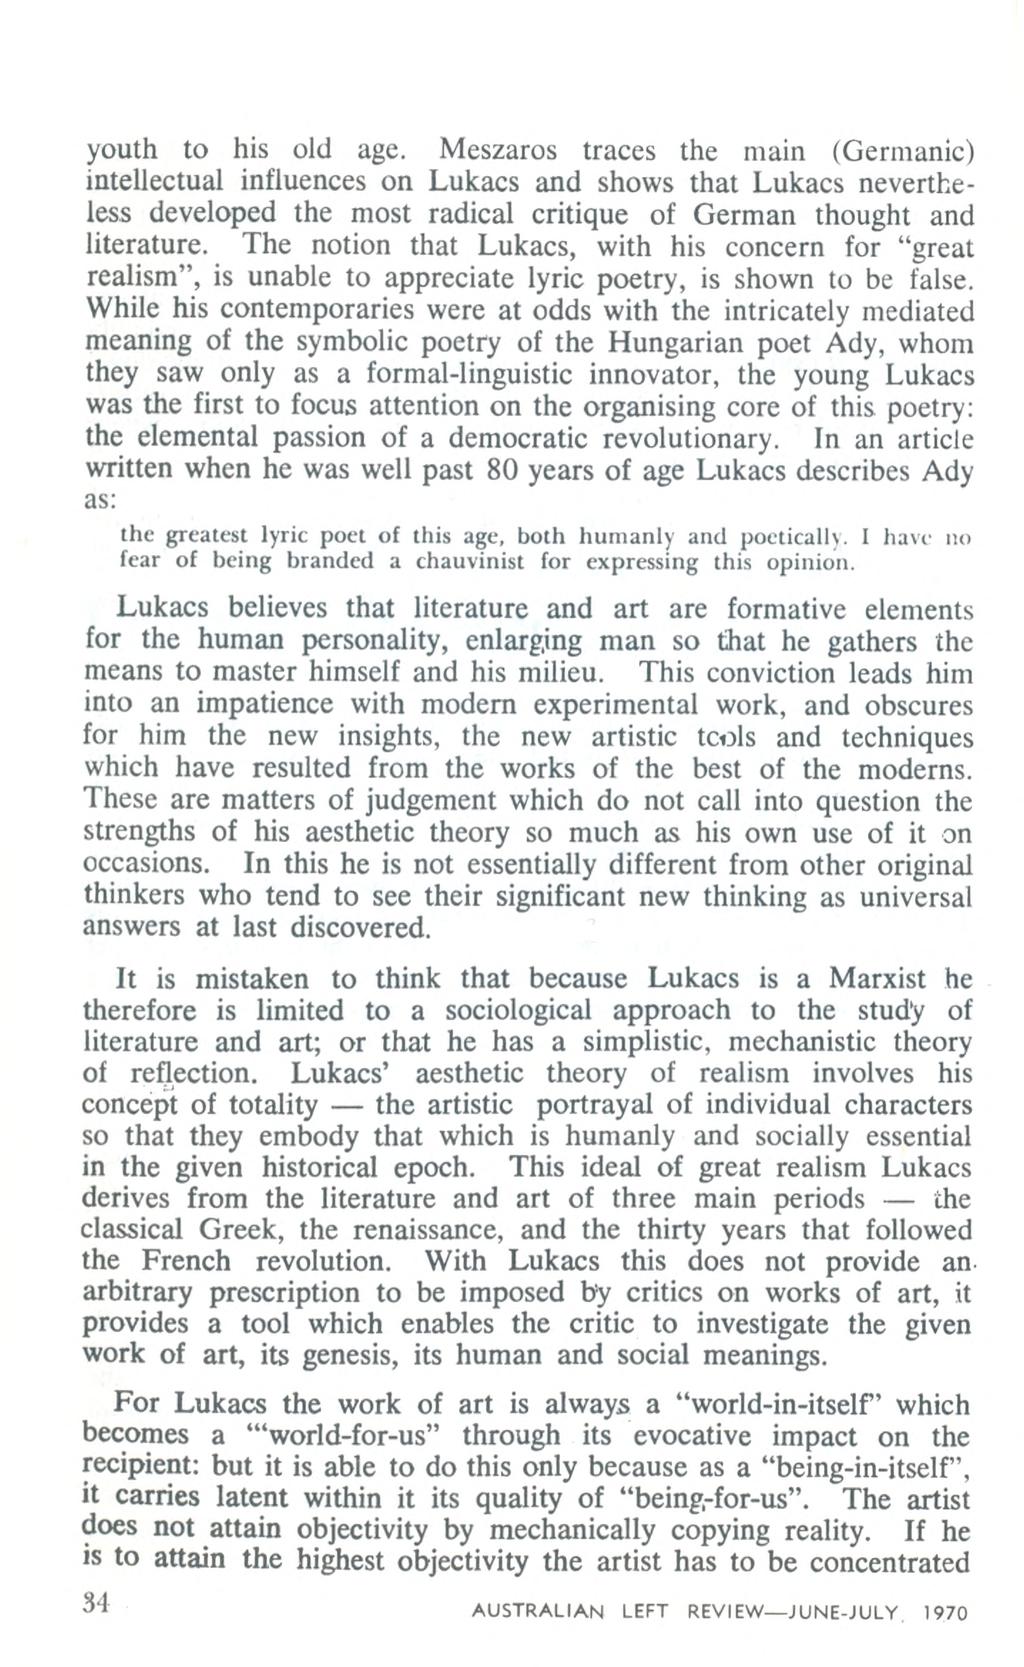 youth to his old age. Meszaros traces the main (Germanic) intellectual influences on Lukacs and shows that Lukacs nevertheless developed the most radical critique of German thought and literature.